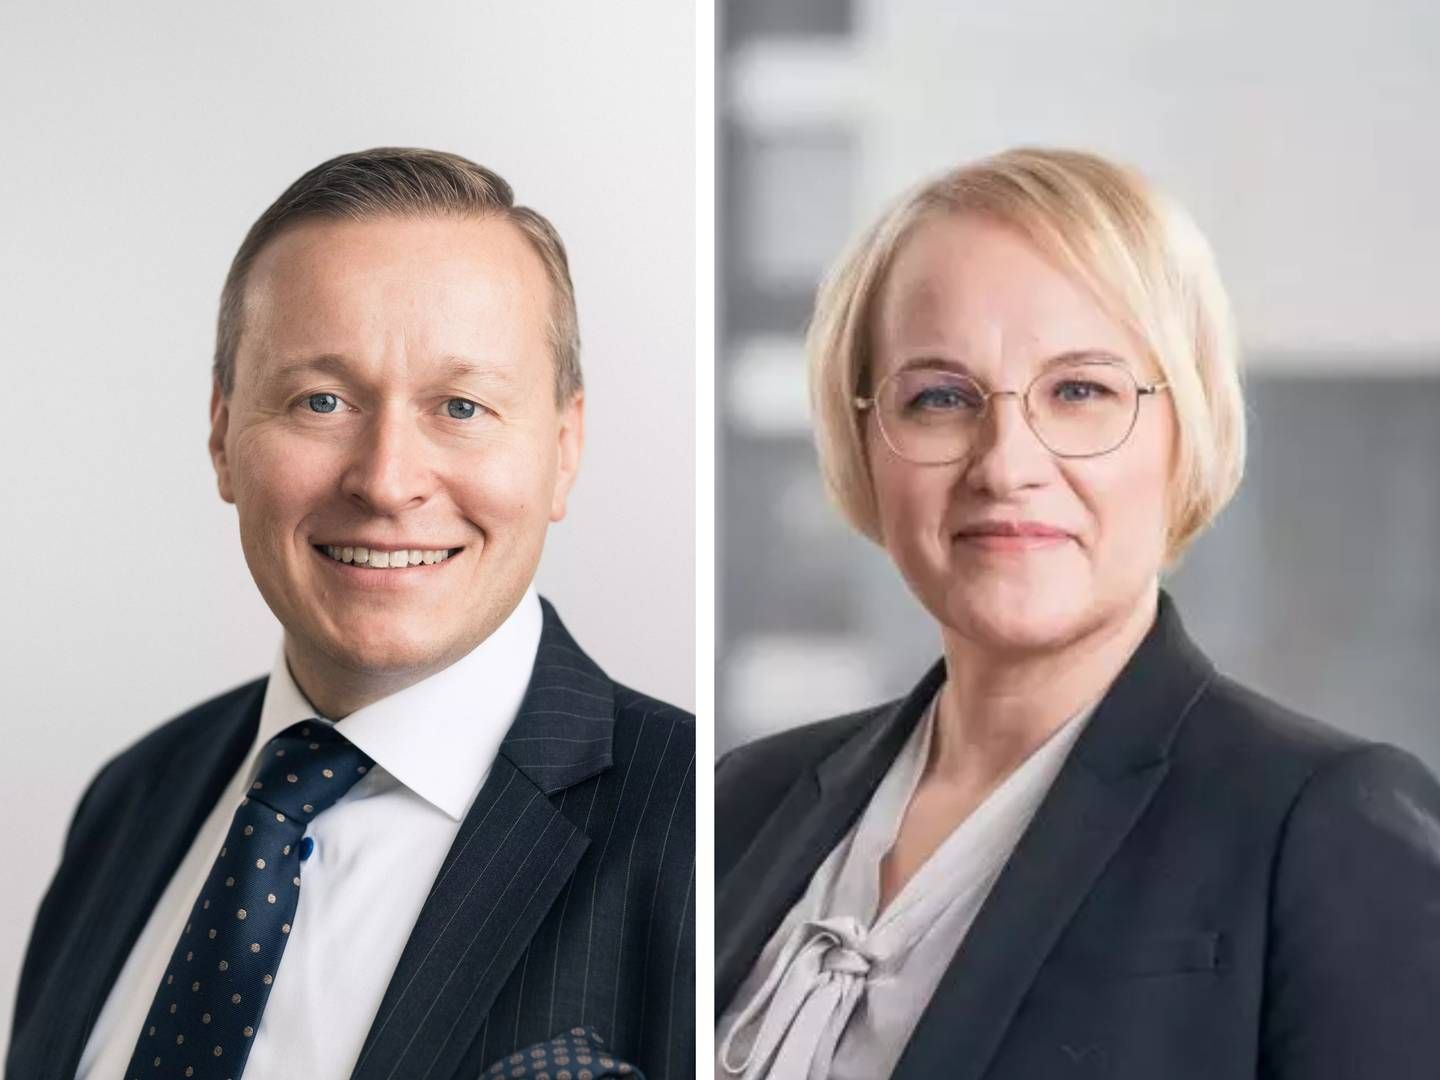 Carl Pettersson is the CEO of Elo, and Jonna Ryhänen is the pension company's recently appointed CIO. | Photo: Elo / Pr